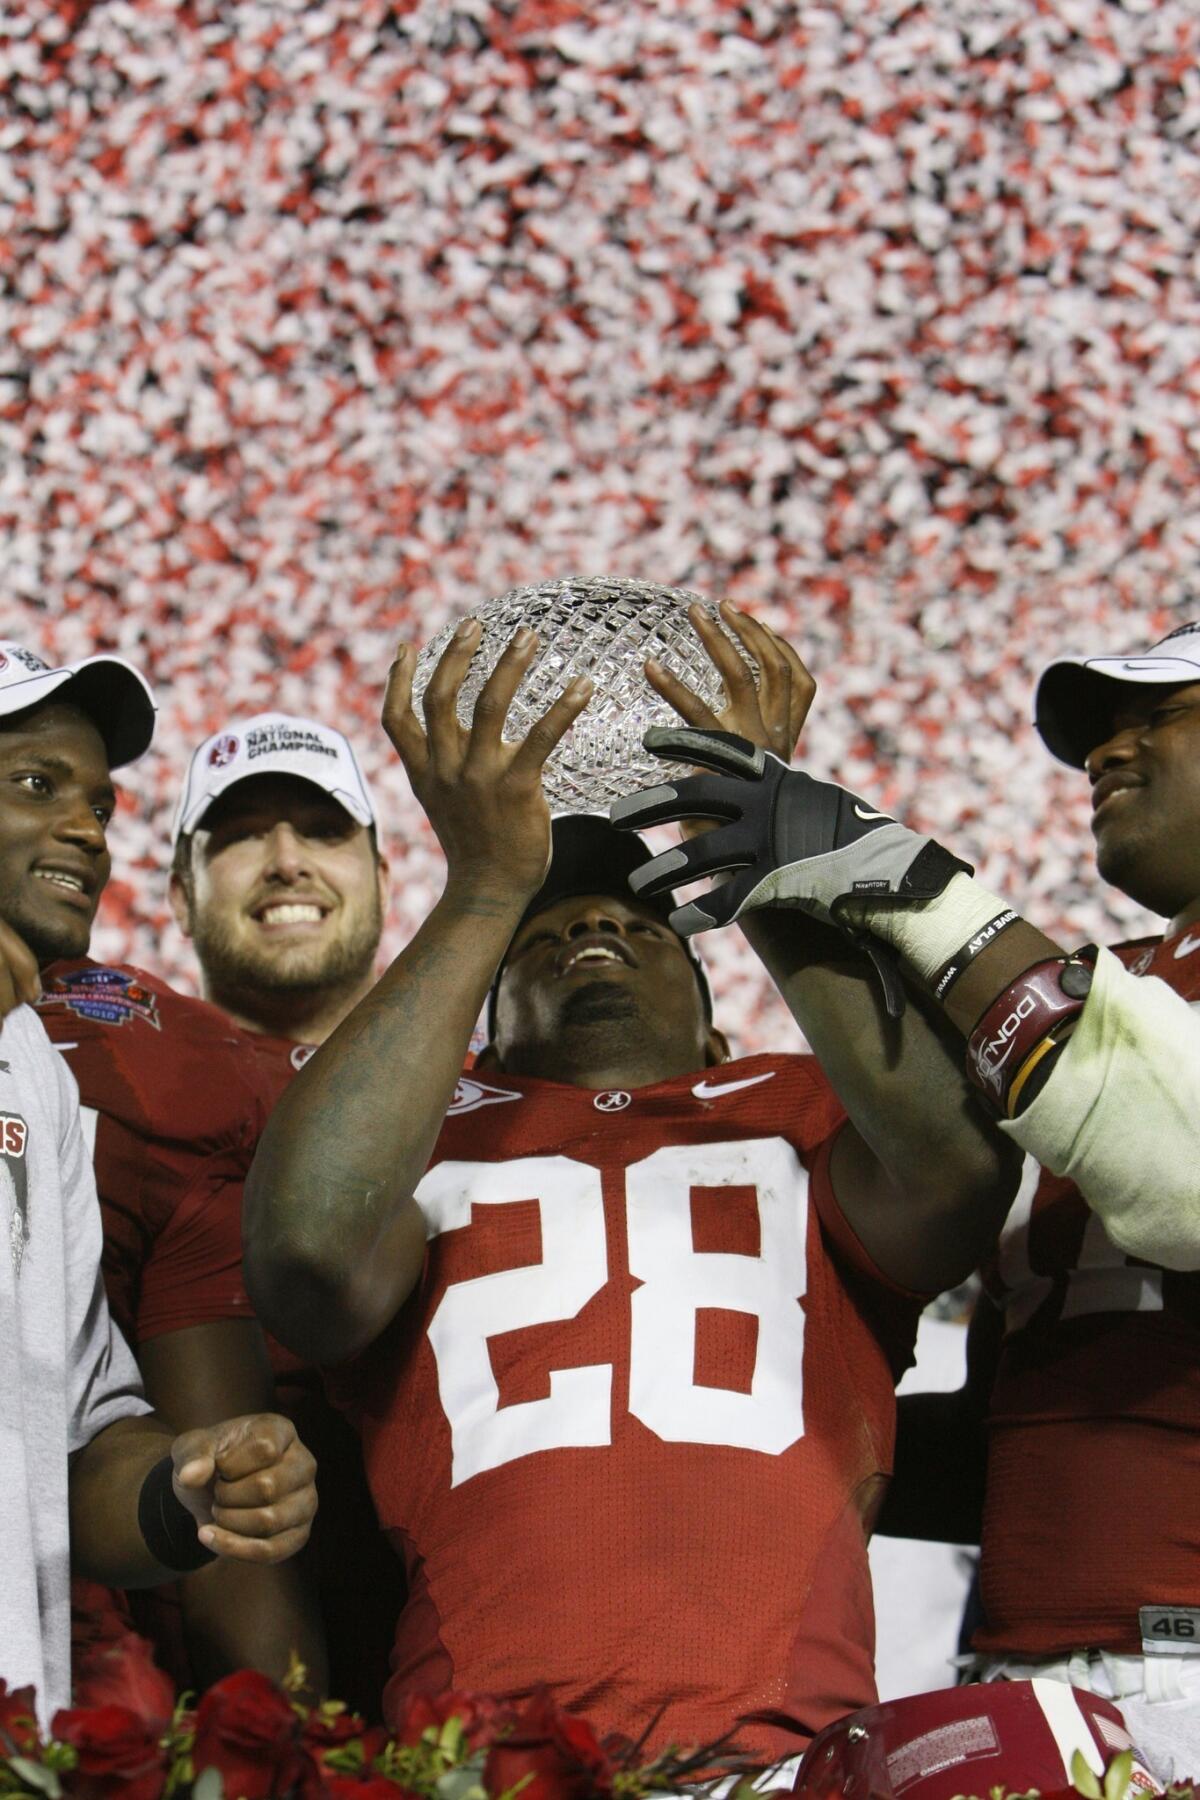 Javier Arenas and his Alabama teammates celebrate the Crimson Tide's BCS national title in 2010. The BCS has offered fans and players plenty of memorable -- and controversial -- moments in its 16-year reign over college football.